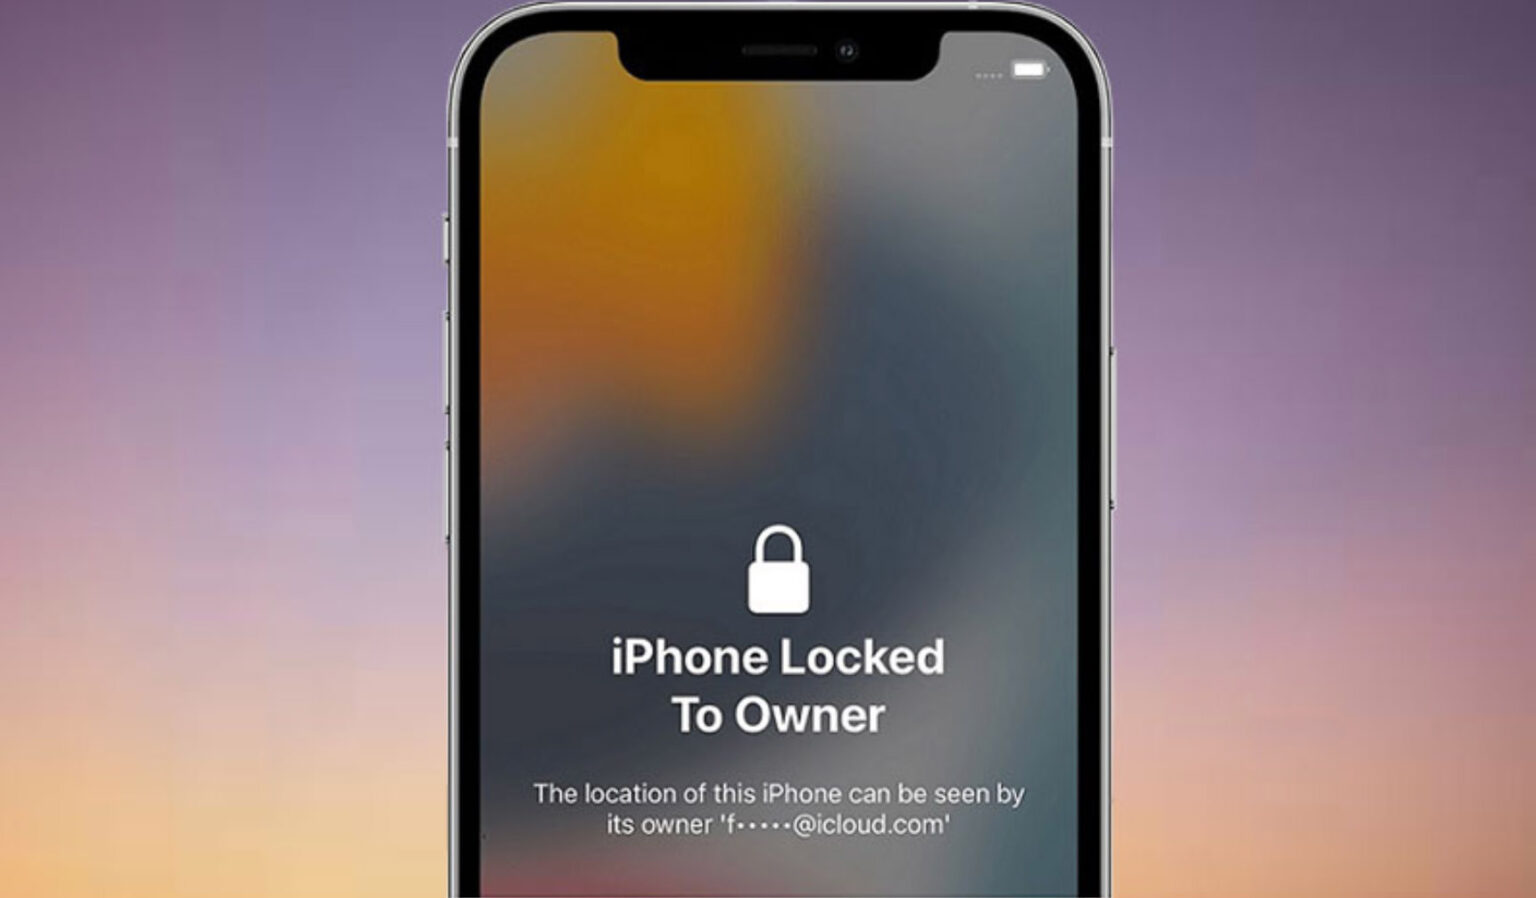 Is Your iPhone Showing "iPhone Locked To Owner" Message After Factory Reset And Unable To Unlock It? In This Article, We Explain How To Solve This Problem.